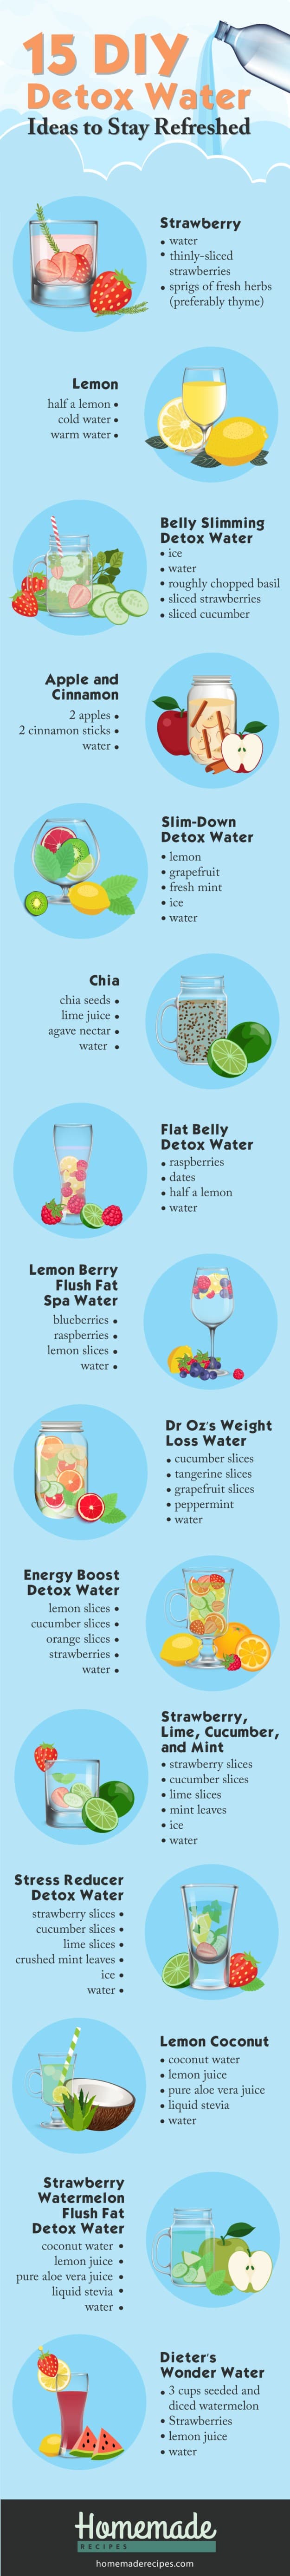 Infographic | DIY Detox Water Ideas To Stay Refreshed | homemade detox water recipes